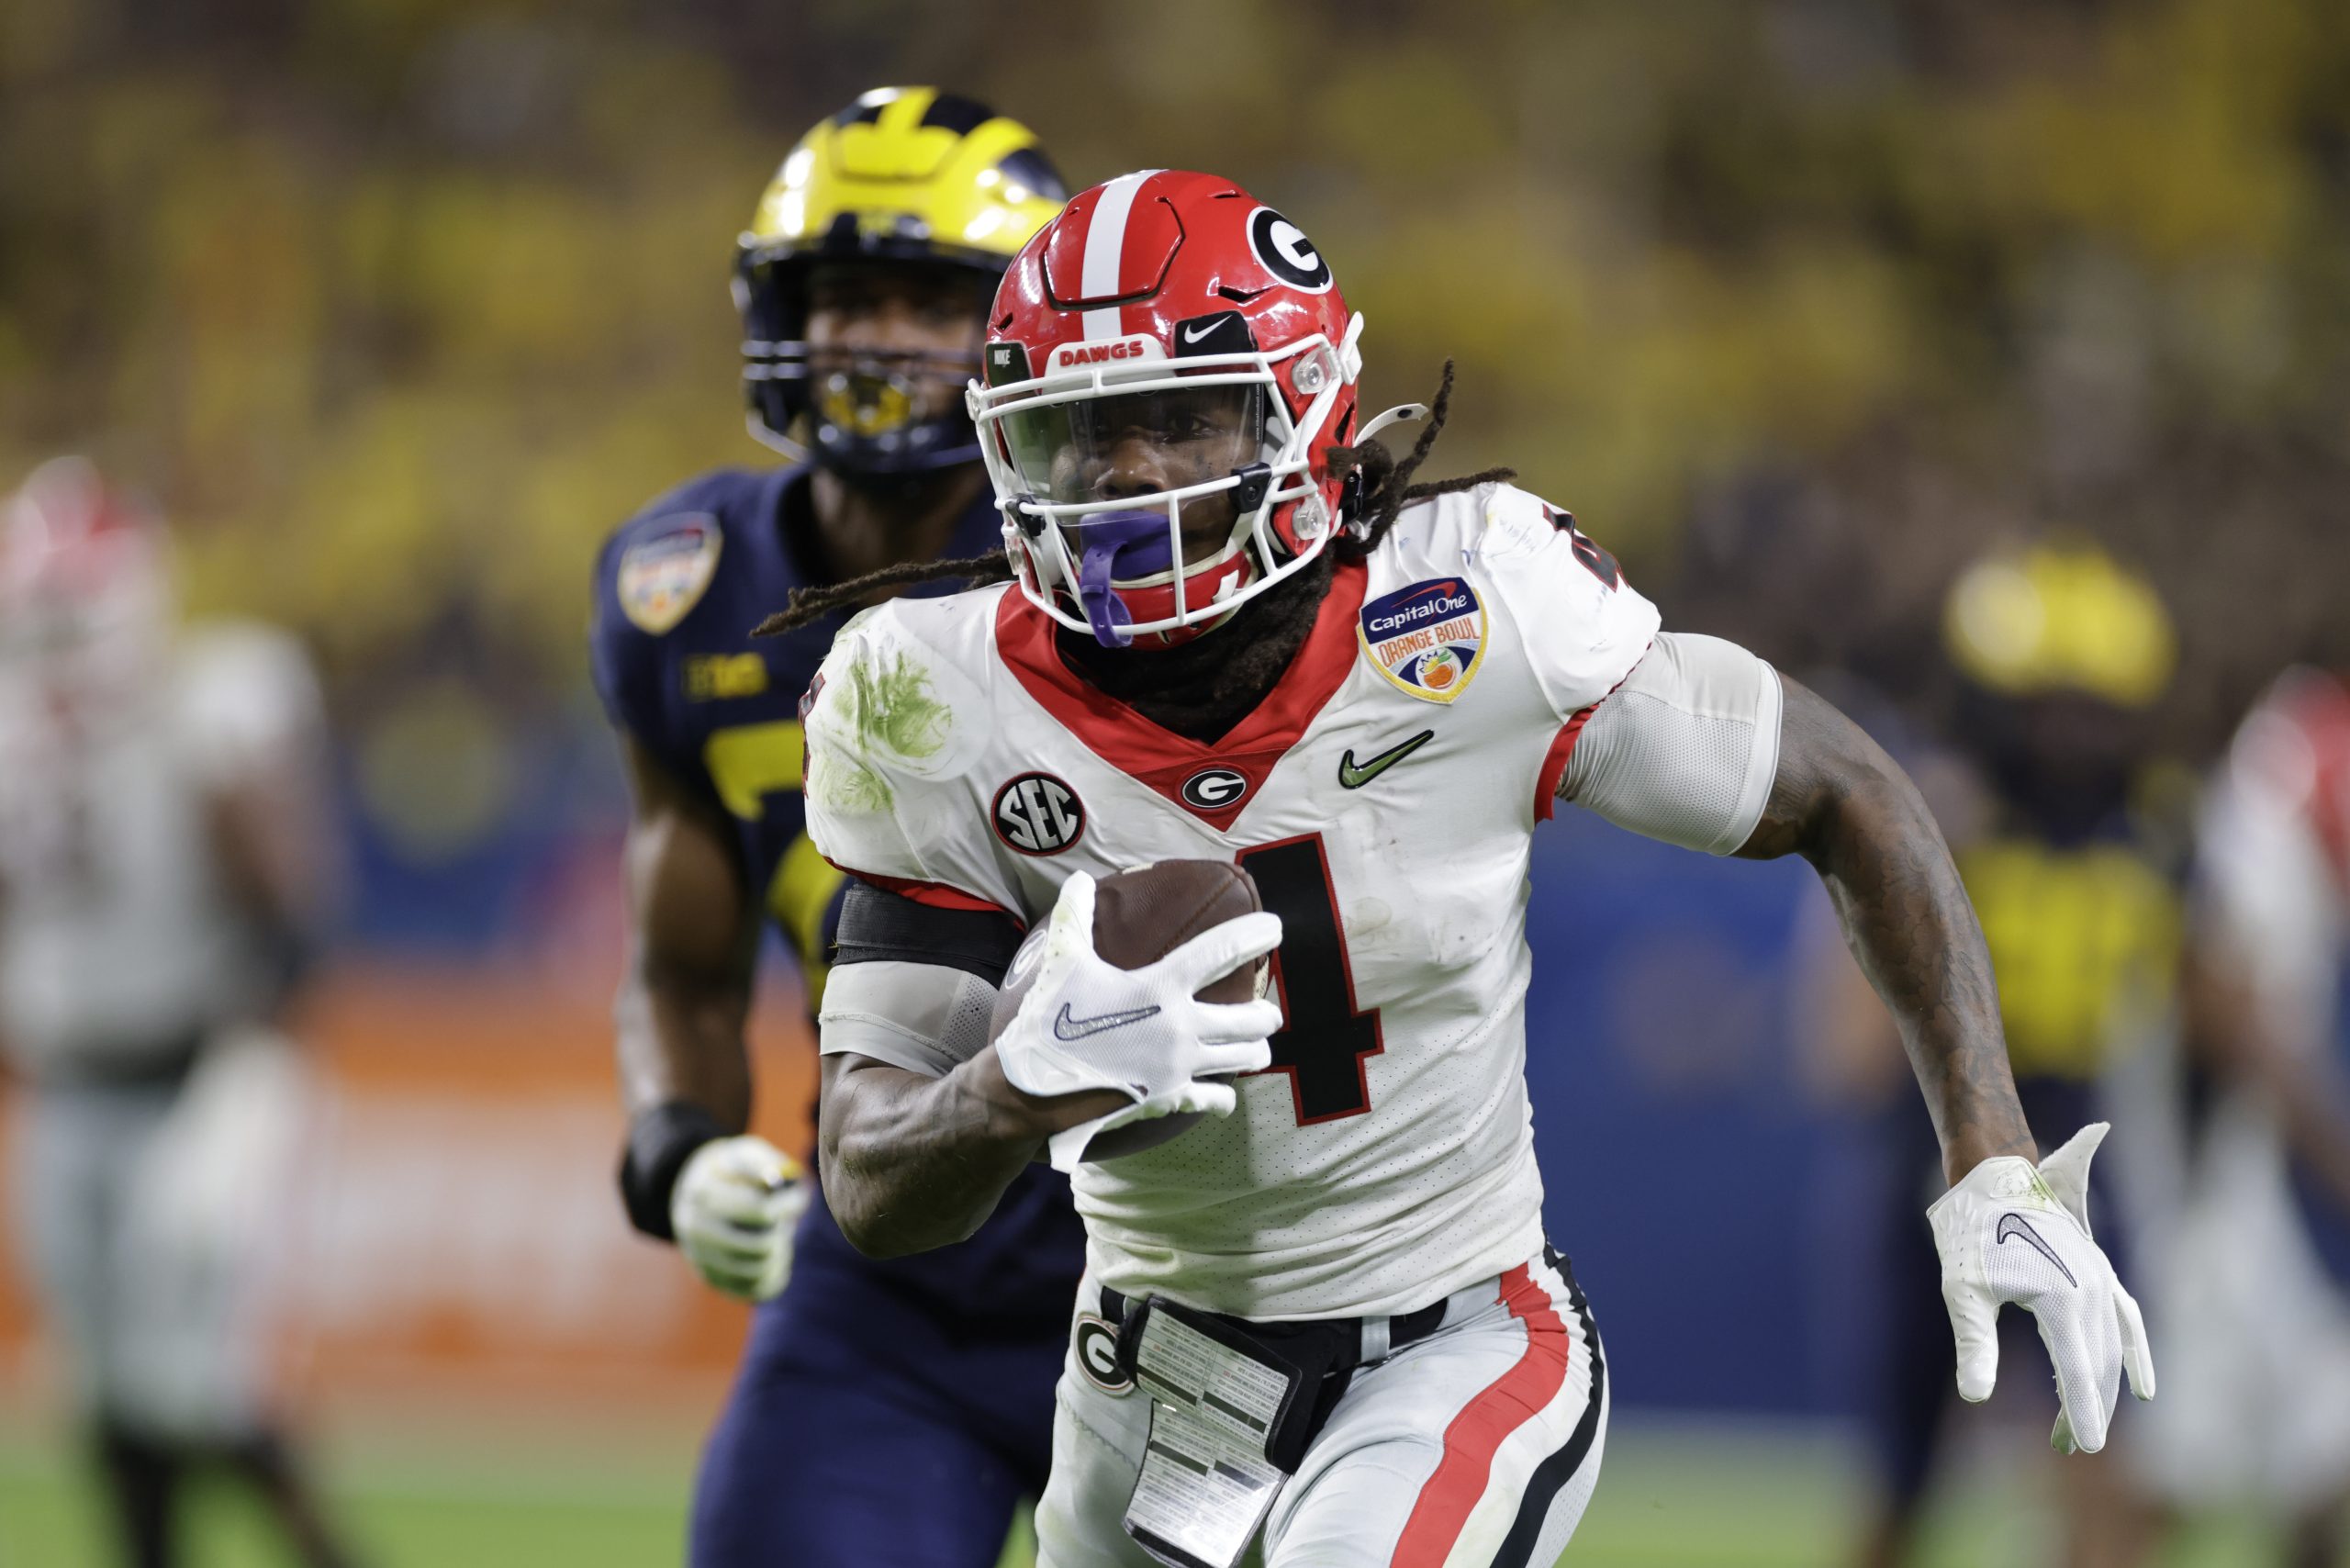 Georgia Bulldogs running back James Cook, who was a second-round pick in the 2022 NFL Draft by the Buffalo Bills.